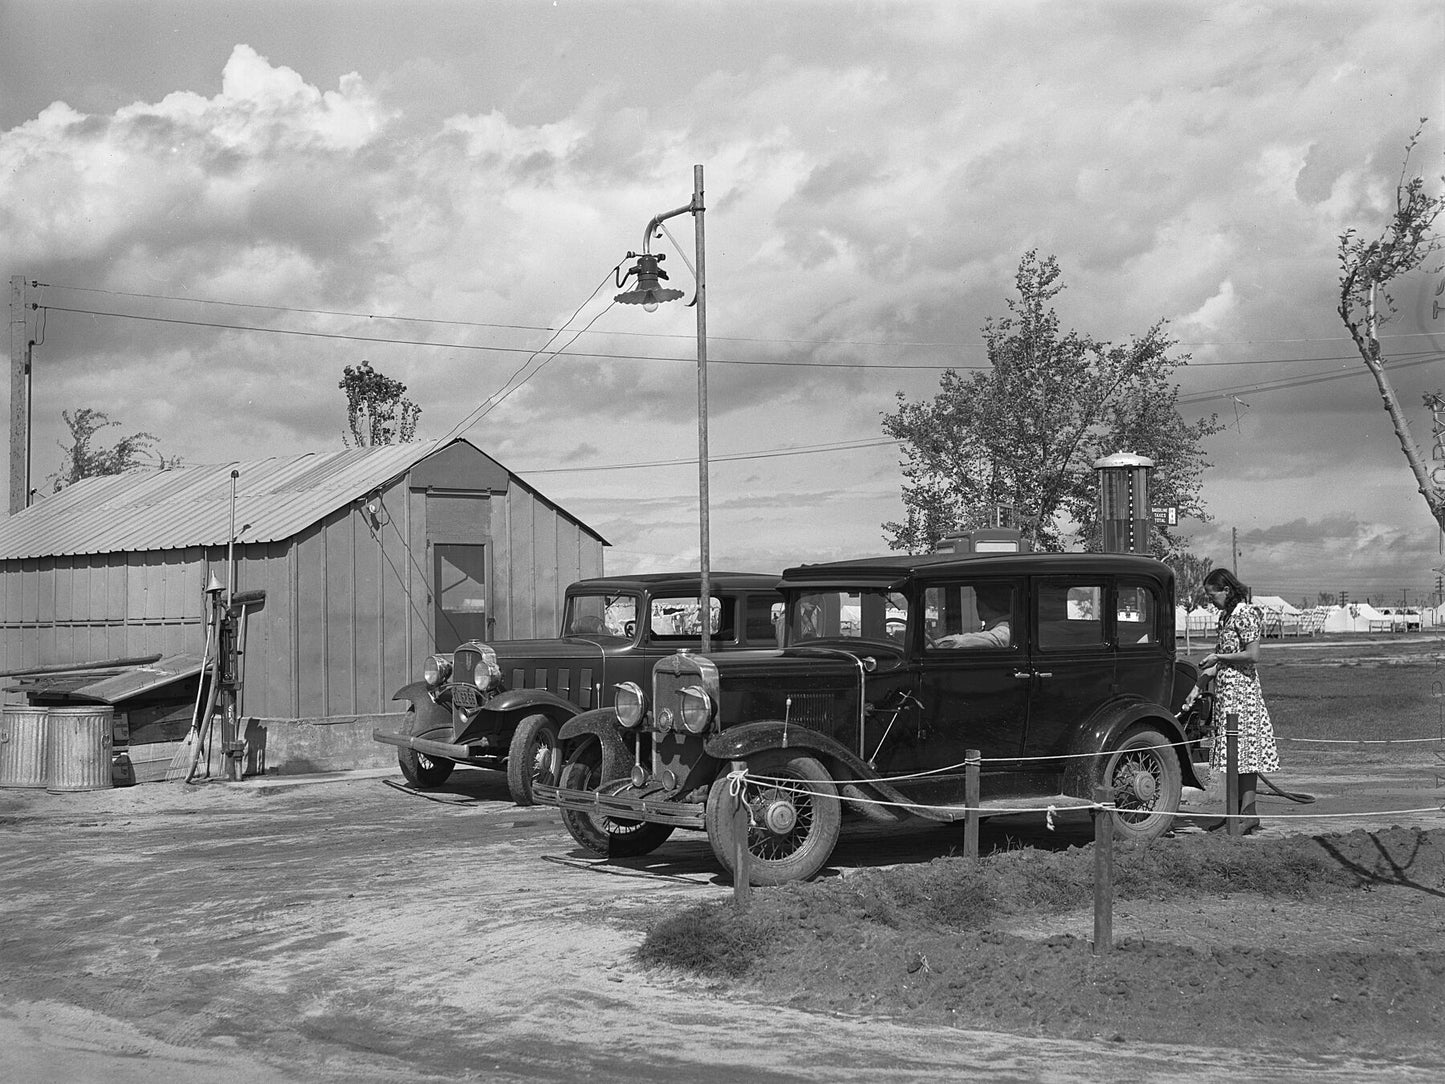 Cooperative gas station - Shafter migrant camp, Shafter, California by Arthur Rothstein - 1940